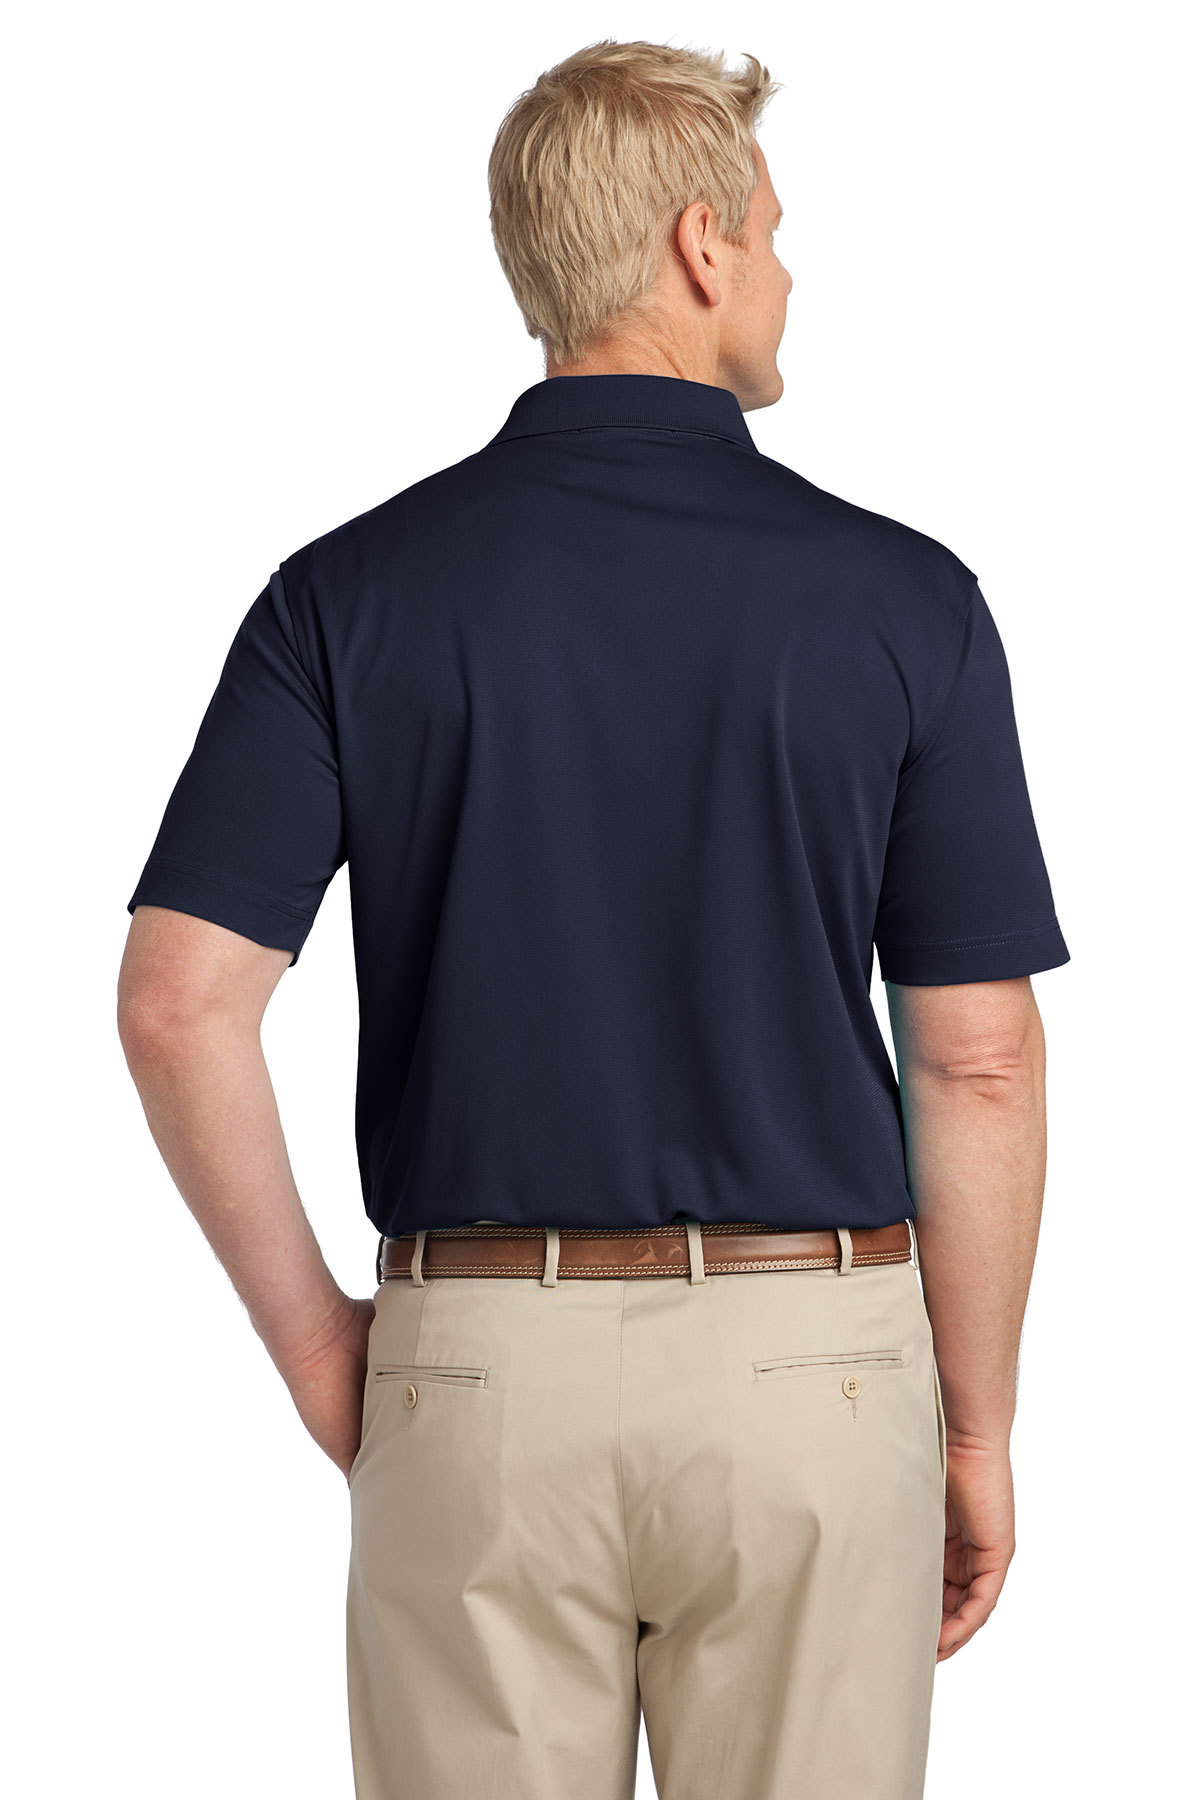 Port Authority Tall Tech Pique Polo | Product | Port Authority